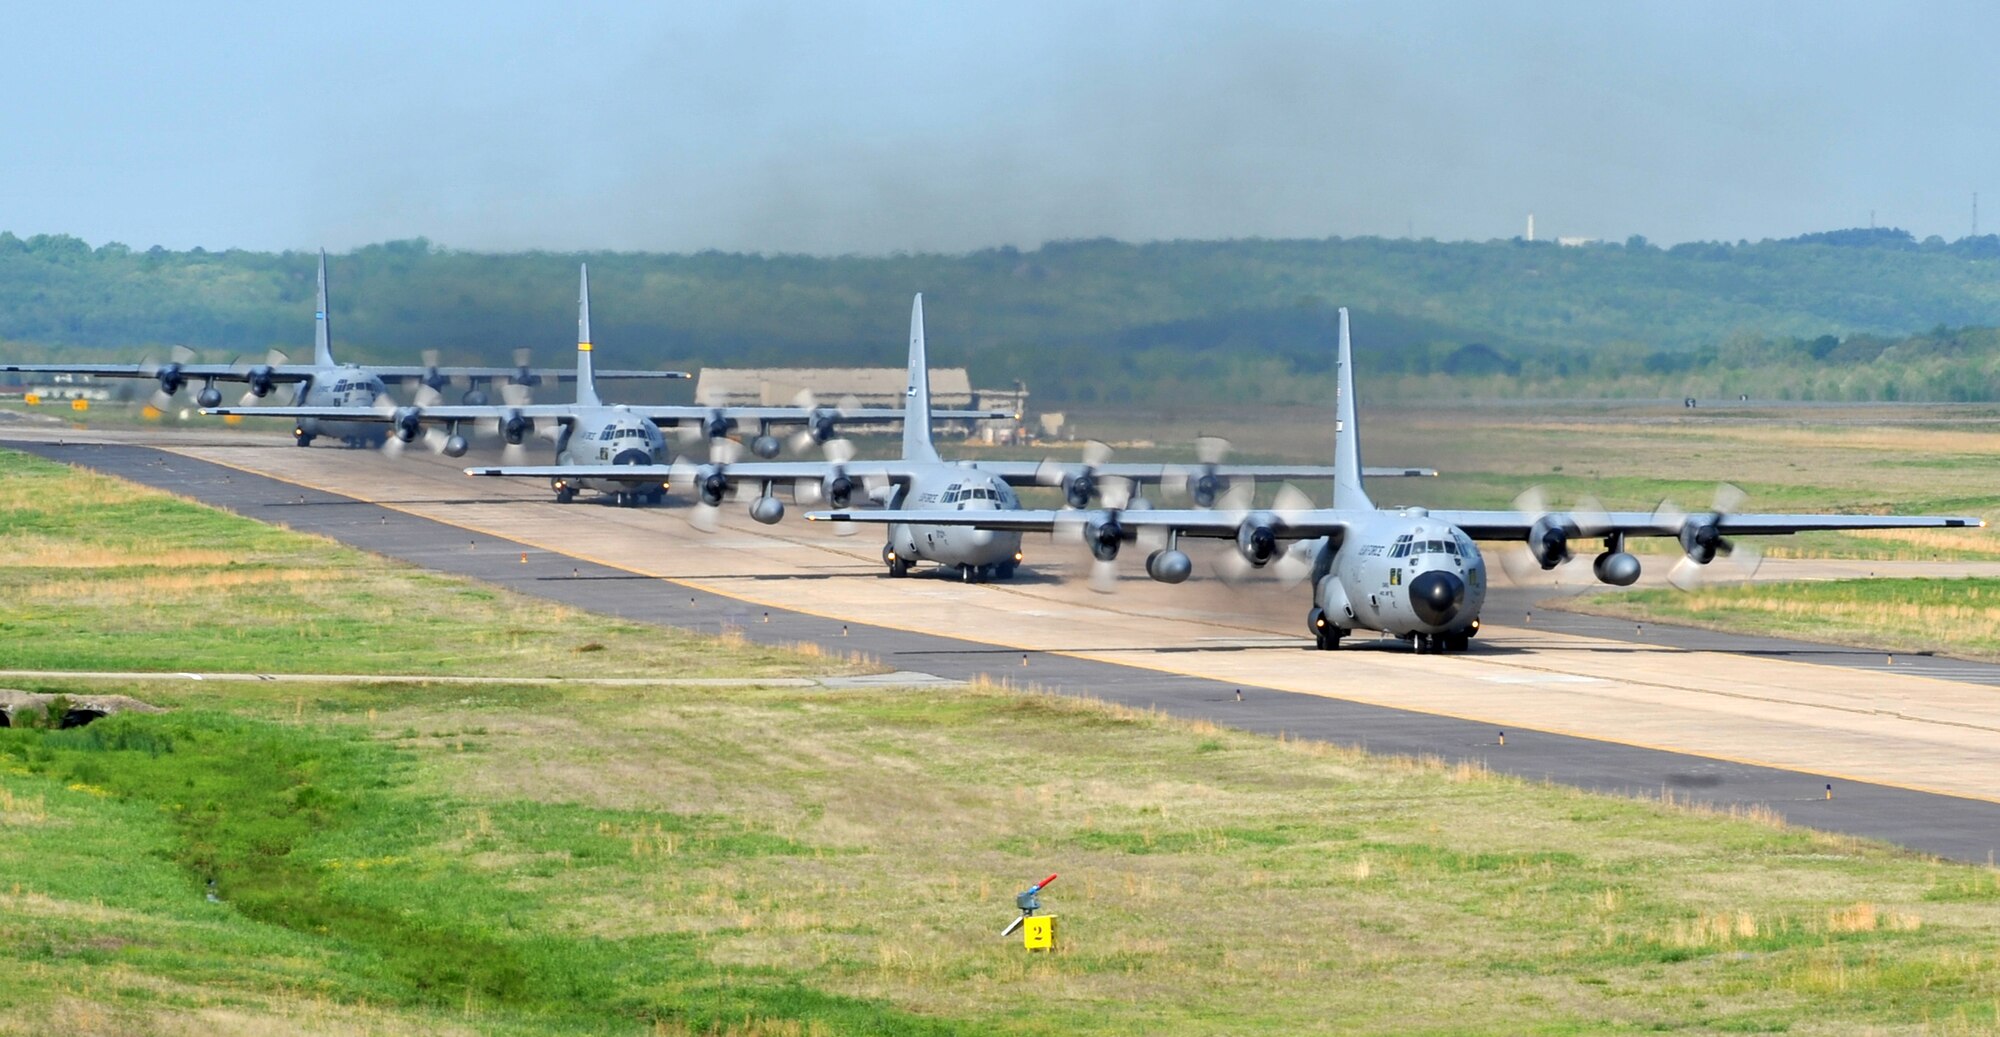 C-130’s taxi April 14, 2011, at Little Rock Air Force Base, Ark., to take off from the base’s runway during the combat surge week. The purpose of the surge week was to make up for lost flying time by increasing the operations tempo.  (U.S. Air Force photo by Airman 1st Class Rusty Frank)